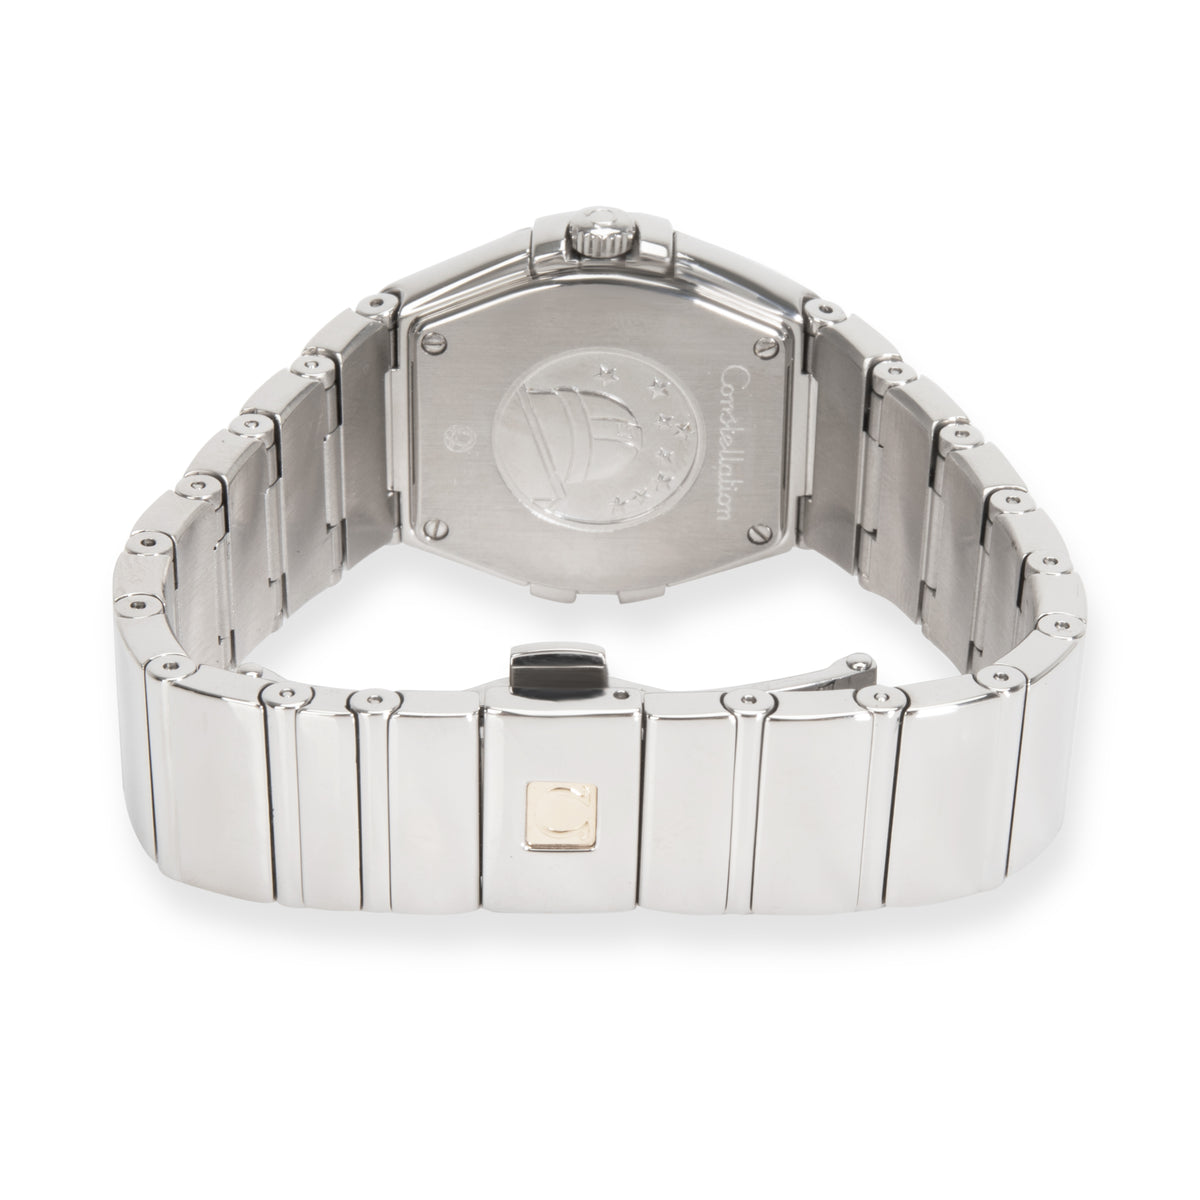 Omega Constellation 123.10.27.60.05.002 Women's Watch in  Stainless Steel